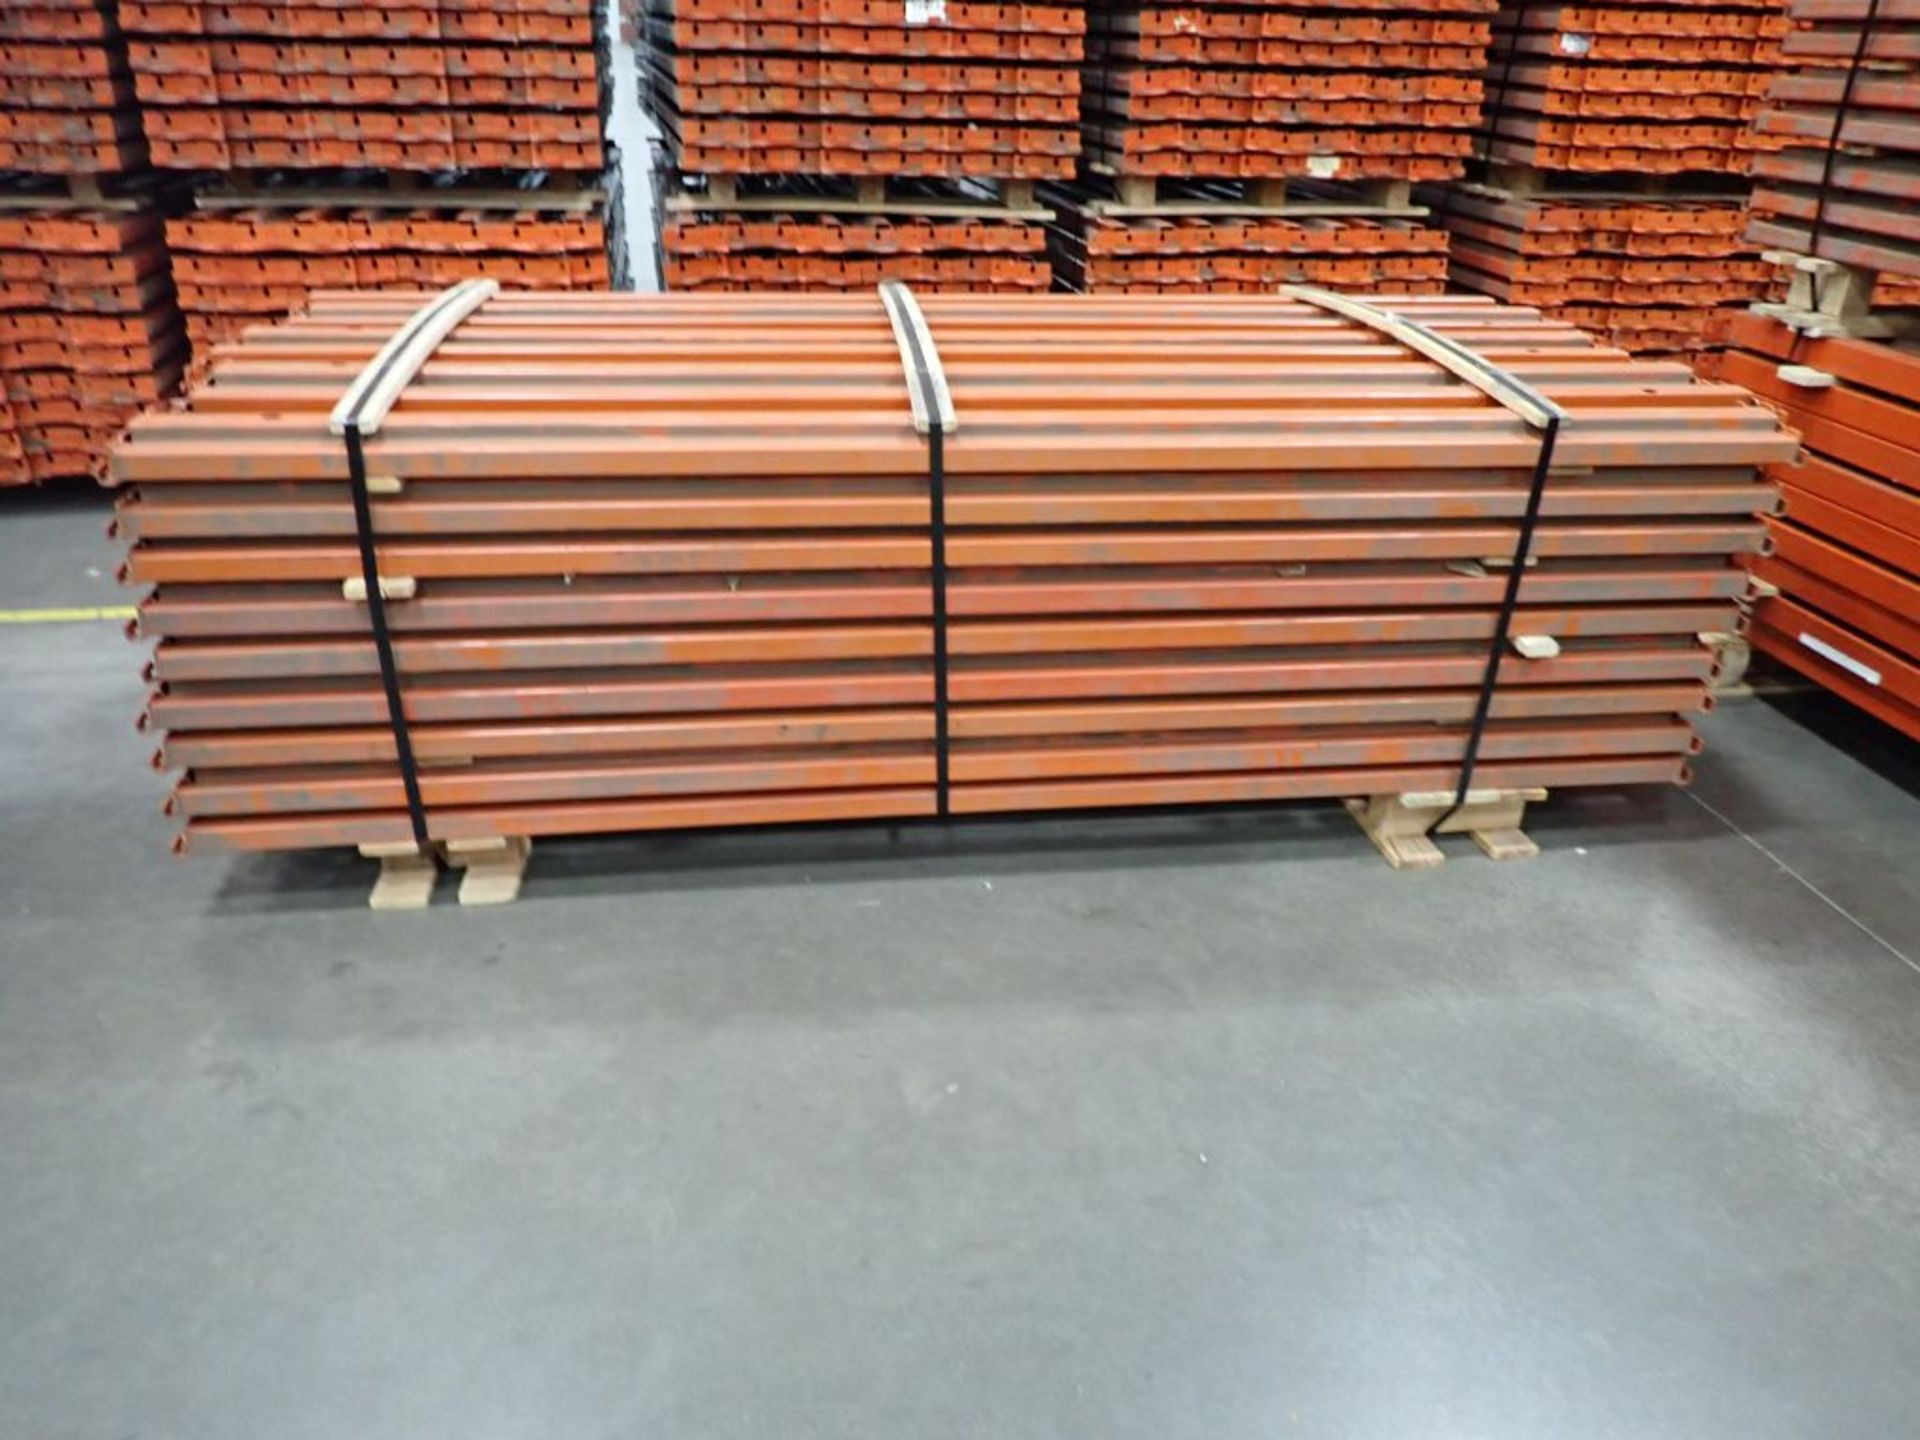 Lot of (72) 96" RUR Slotted Crossbeams - Image 5 of 5